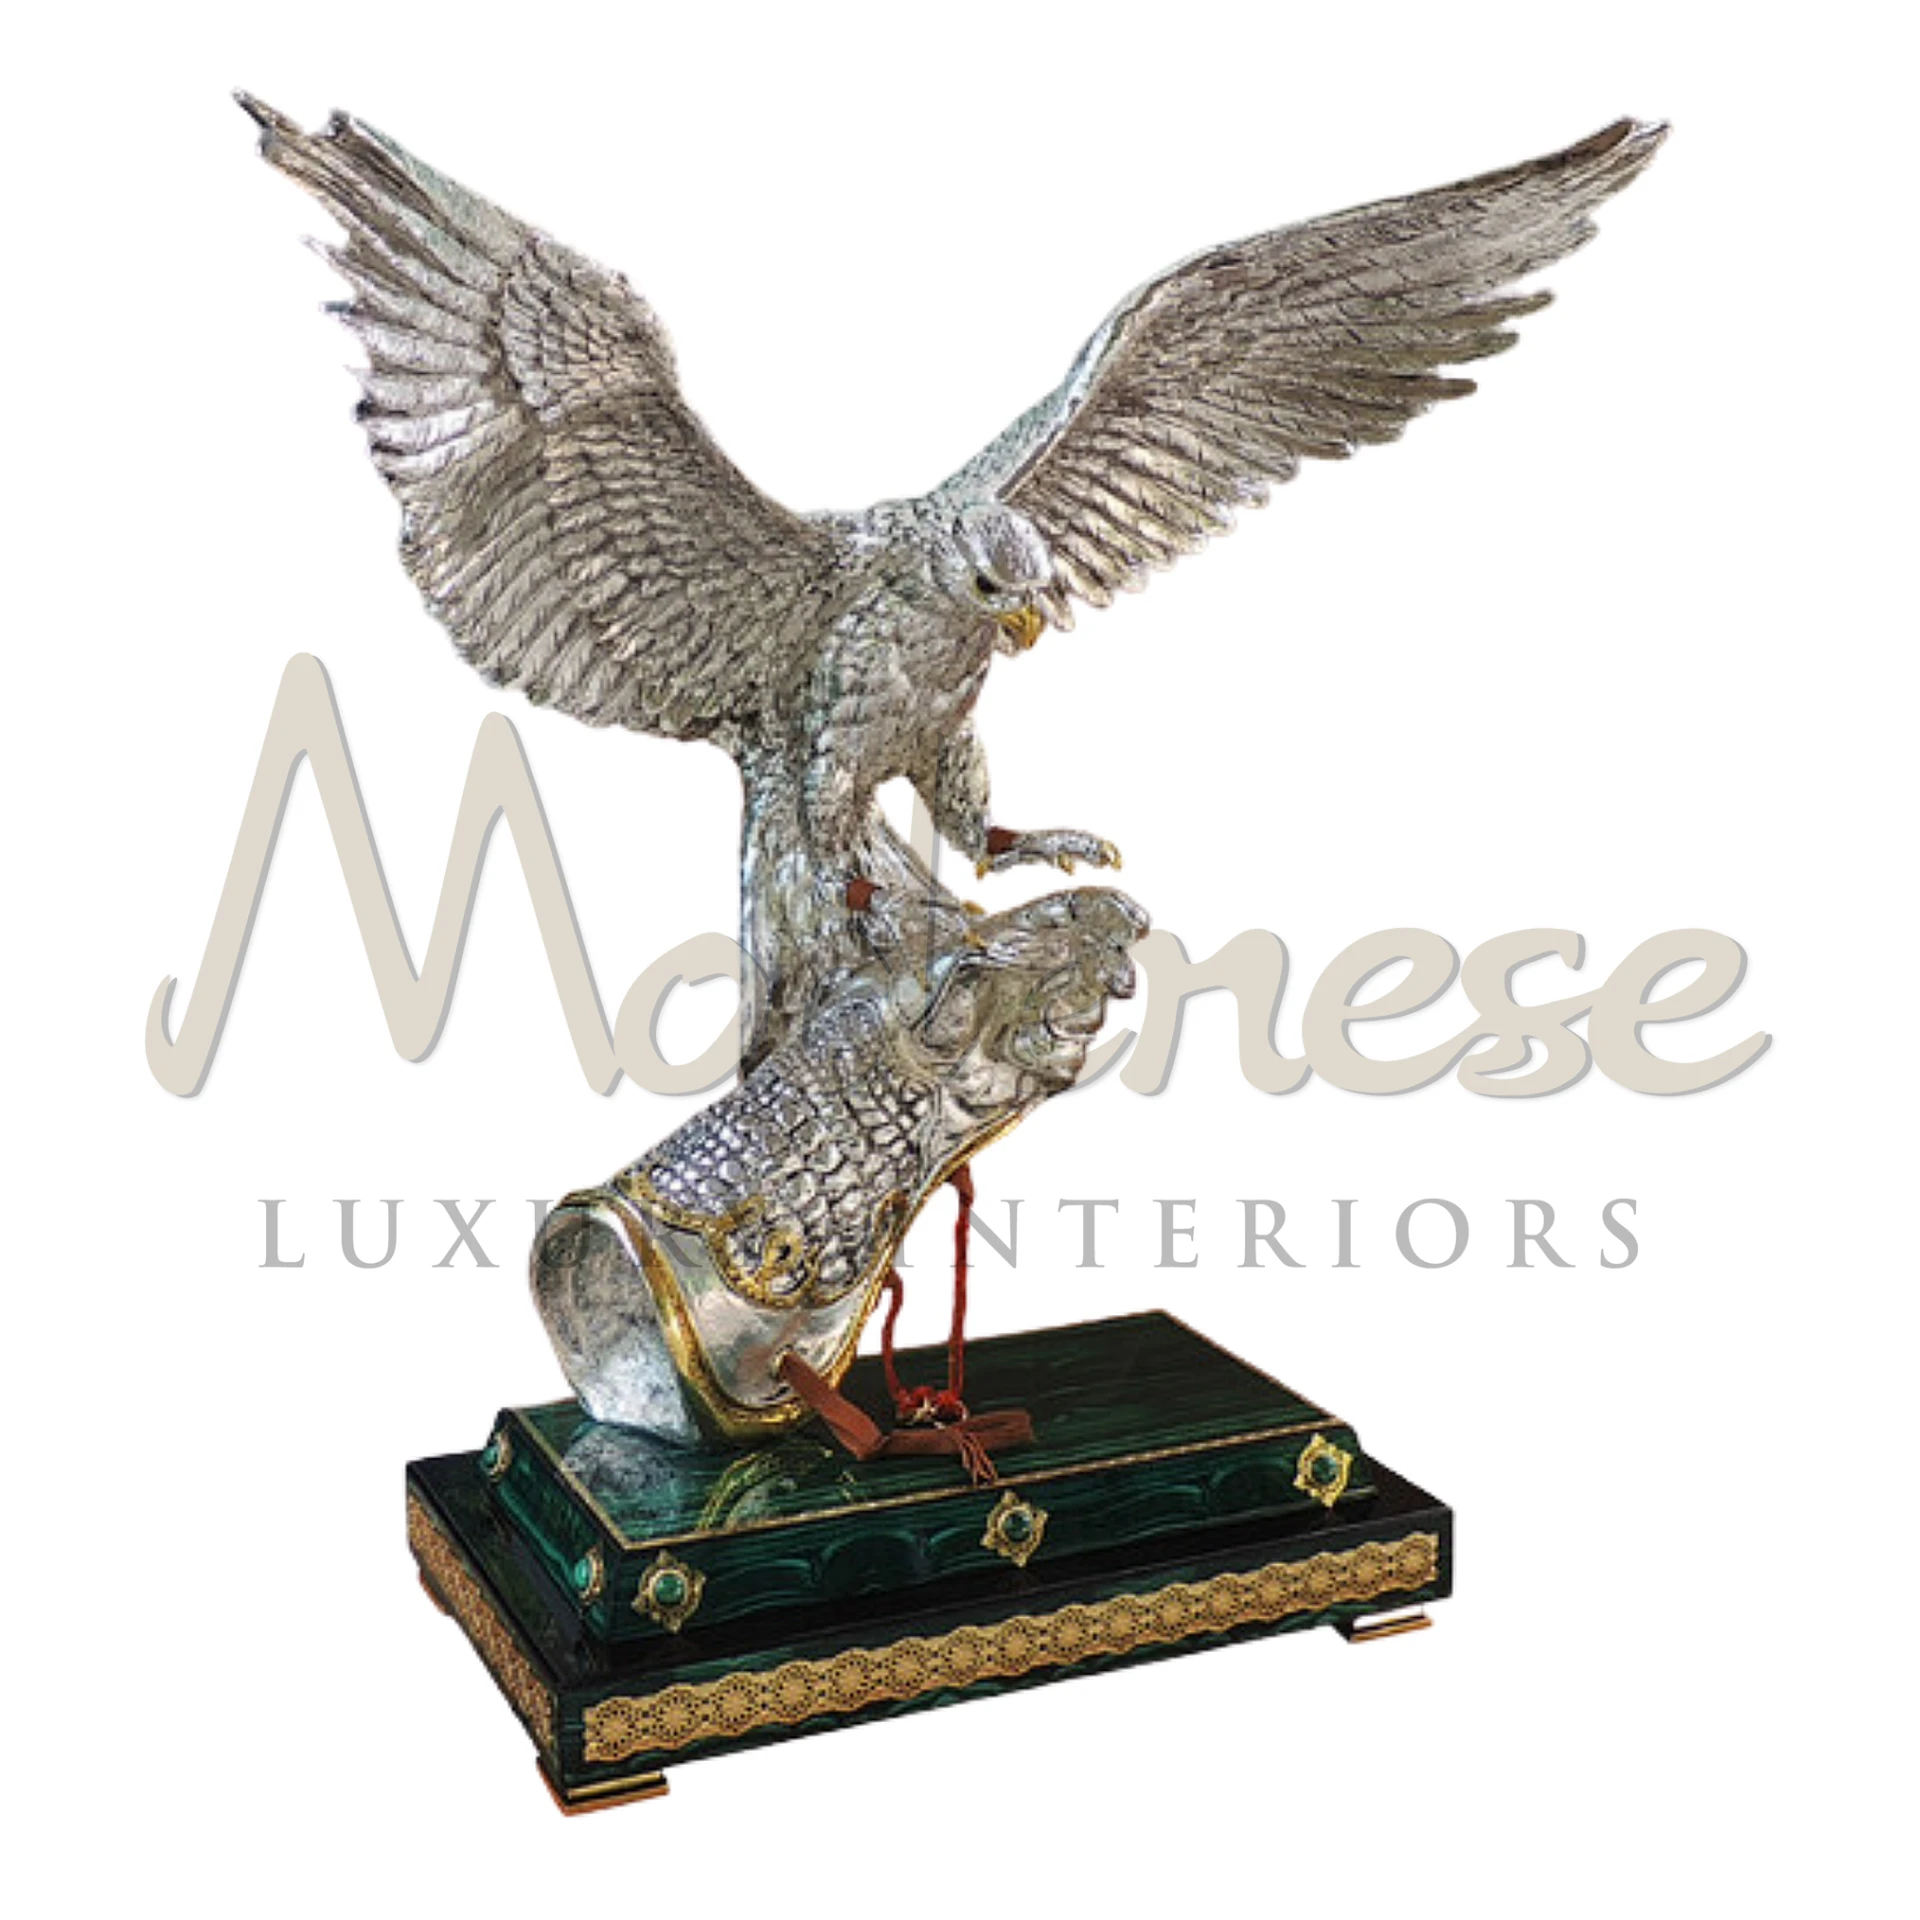 Regal Silver Falcon statuette in majestic stance, with wings spread, enhancing luxury interior design with classic and baroque style elegance.